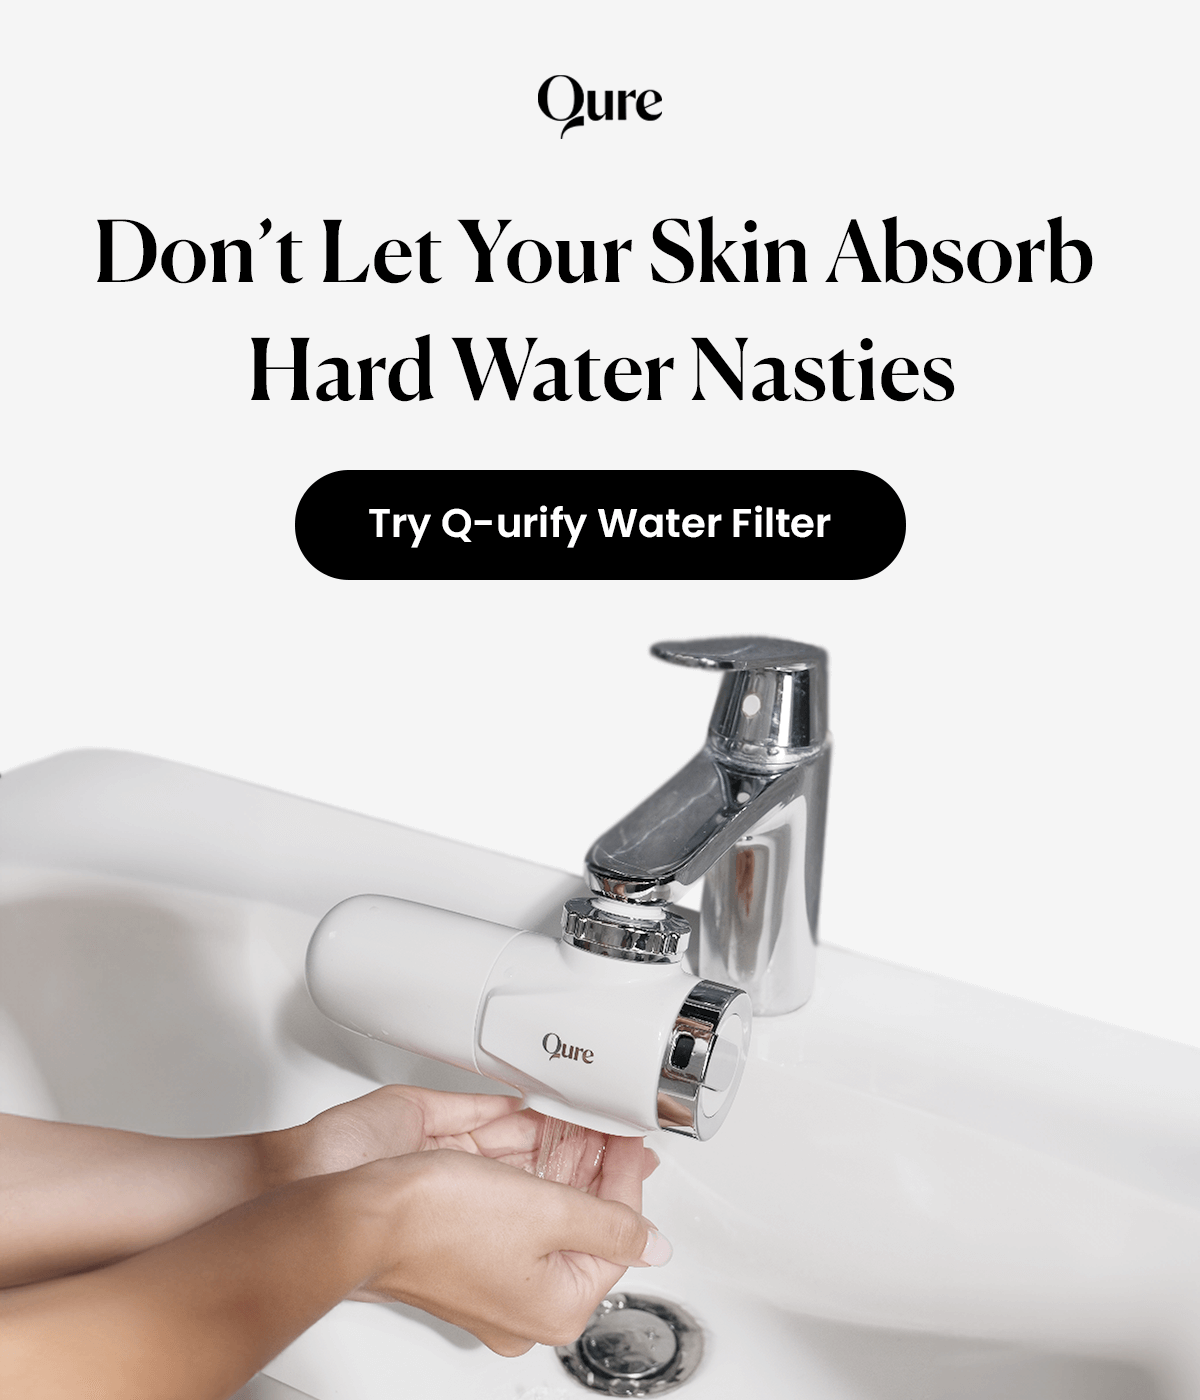 Don’t Let Your Skin Absorb Hard Water Nasties | Try Q-urify Water Filter